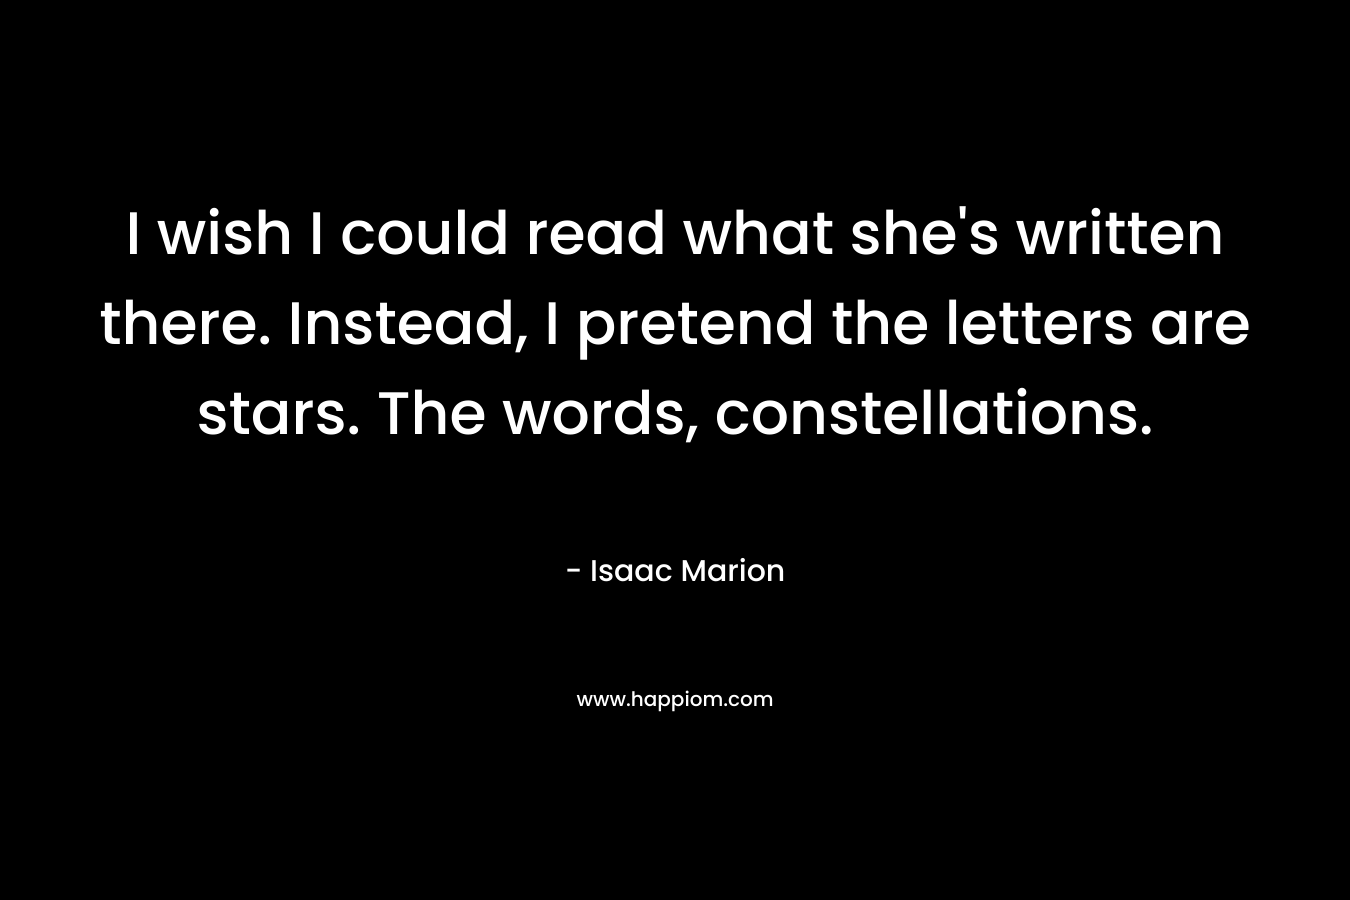 I wish I could read what she’s written there. Instead, I pretend the letters are stars. The words, constellations. – Isaac Marion